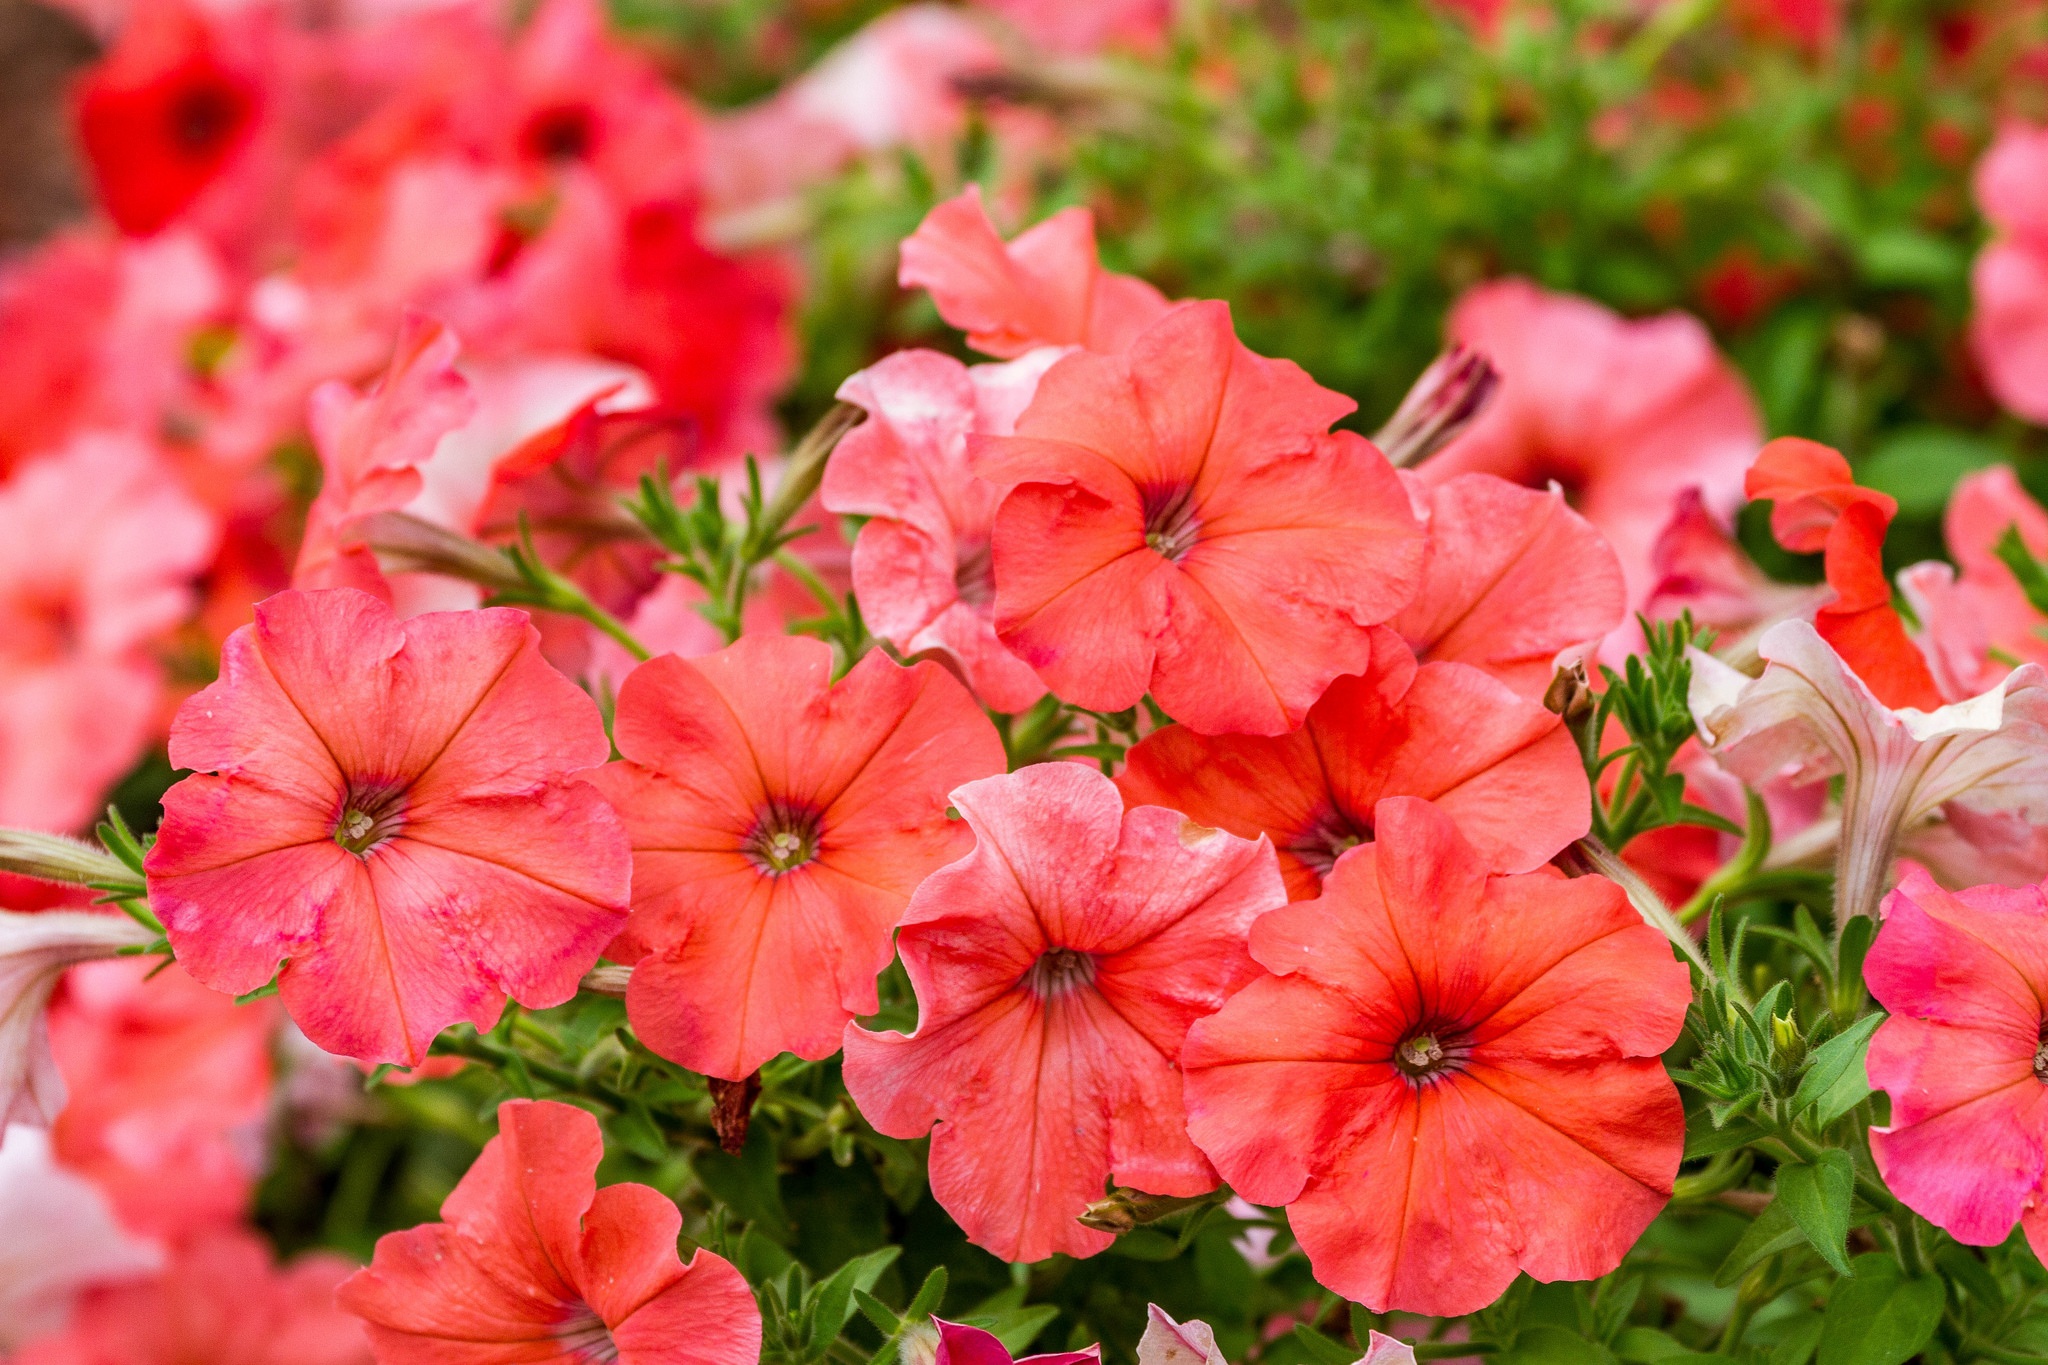 earth, petunia, flower, nature, red flower, flowers